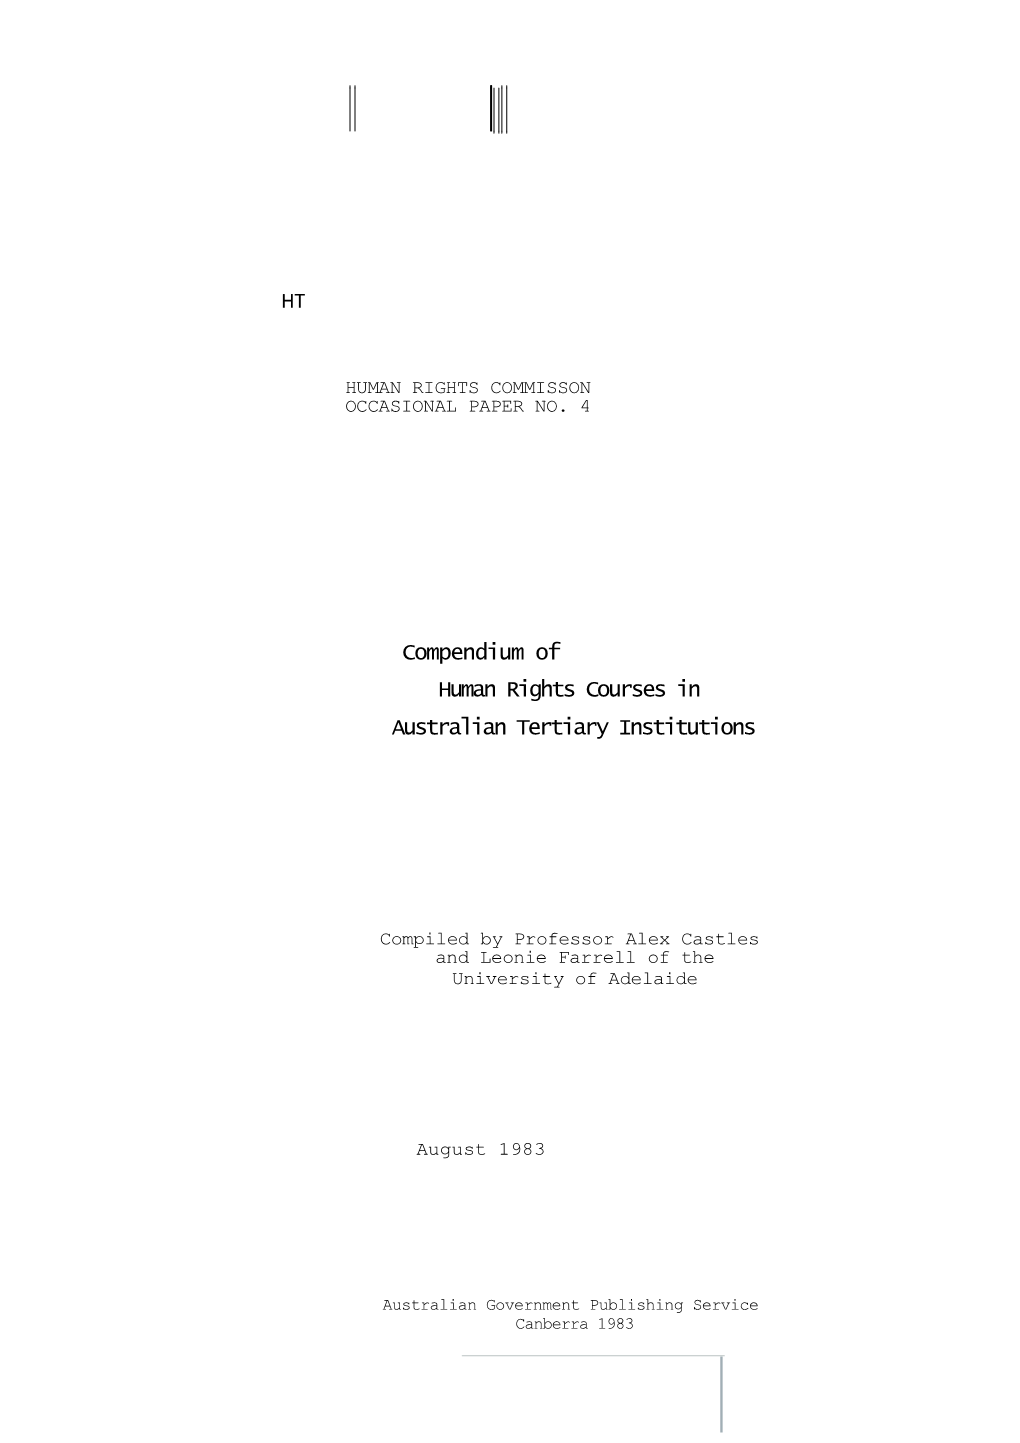 Human Rights Commisson Occasional Paper No. 4